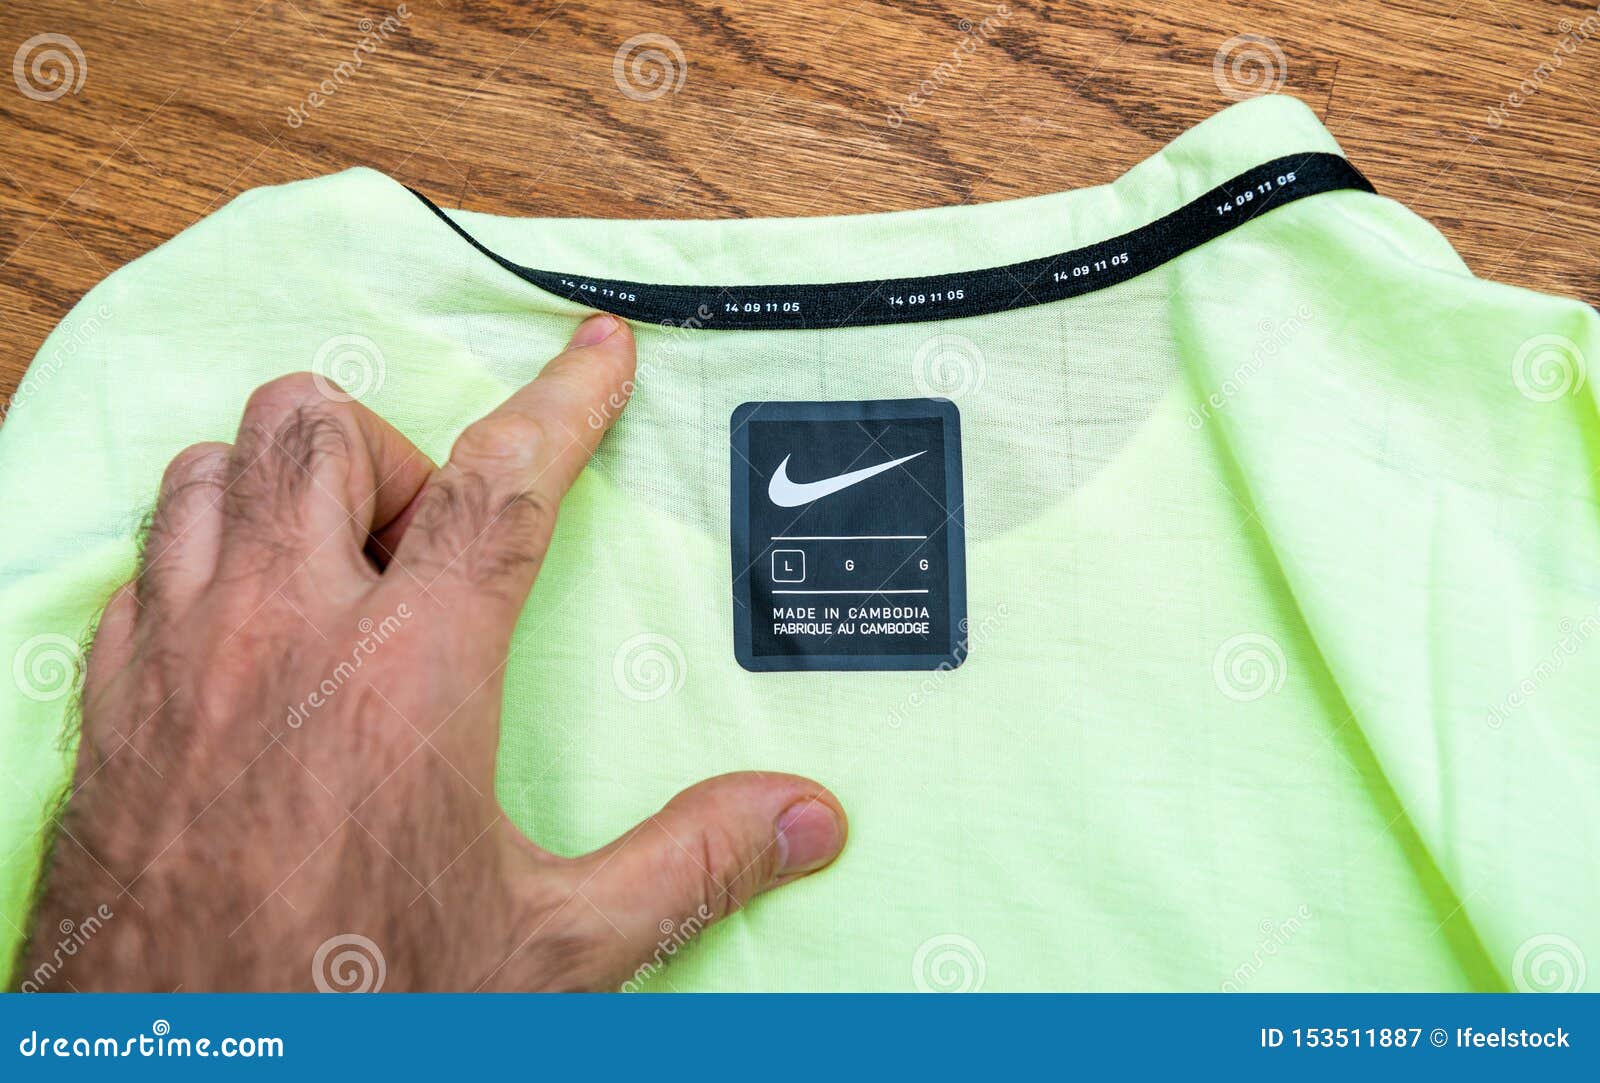 new nike clothes 2019